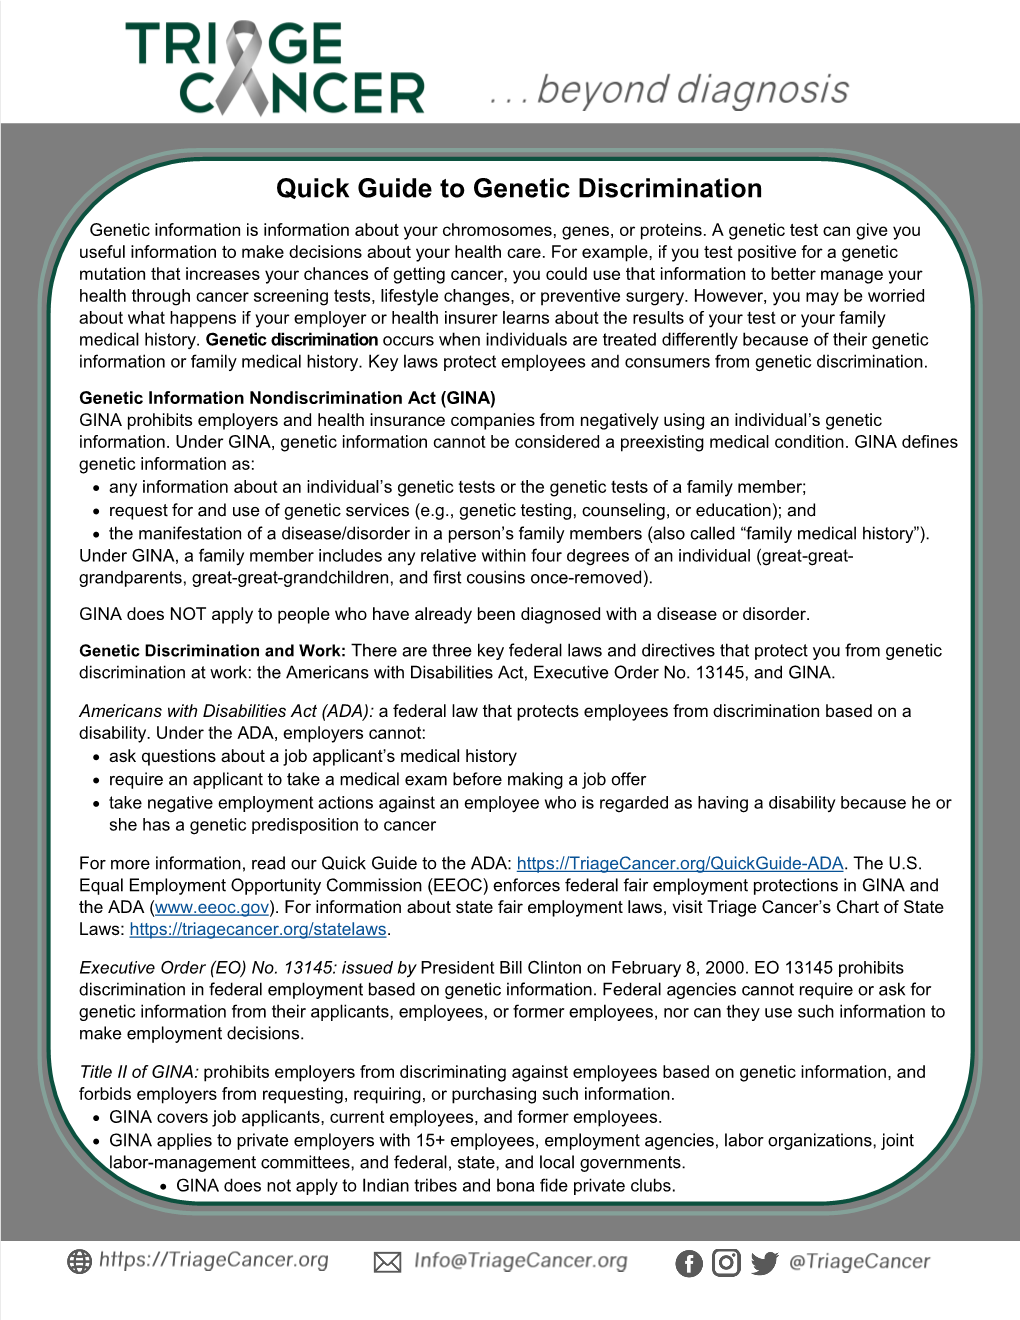 Quick Guide to Genetic Discrimination